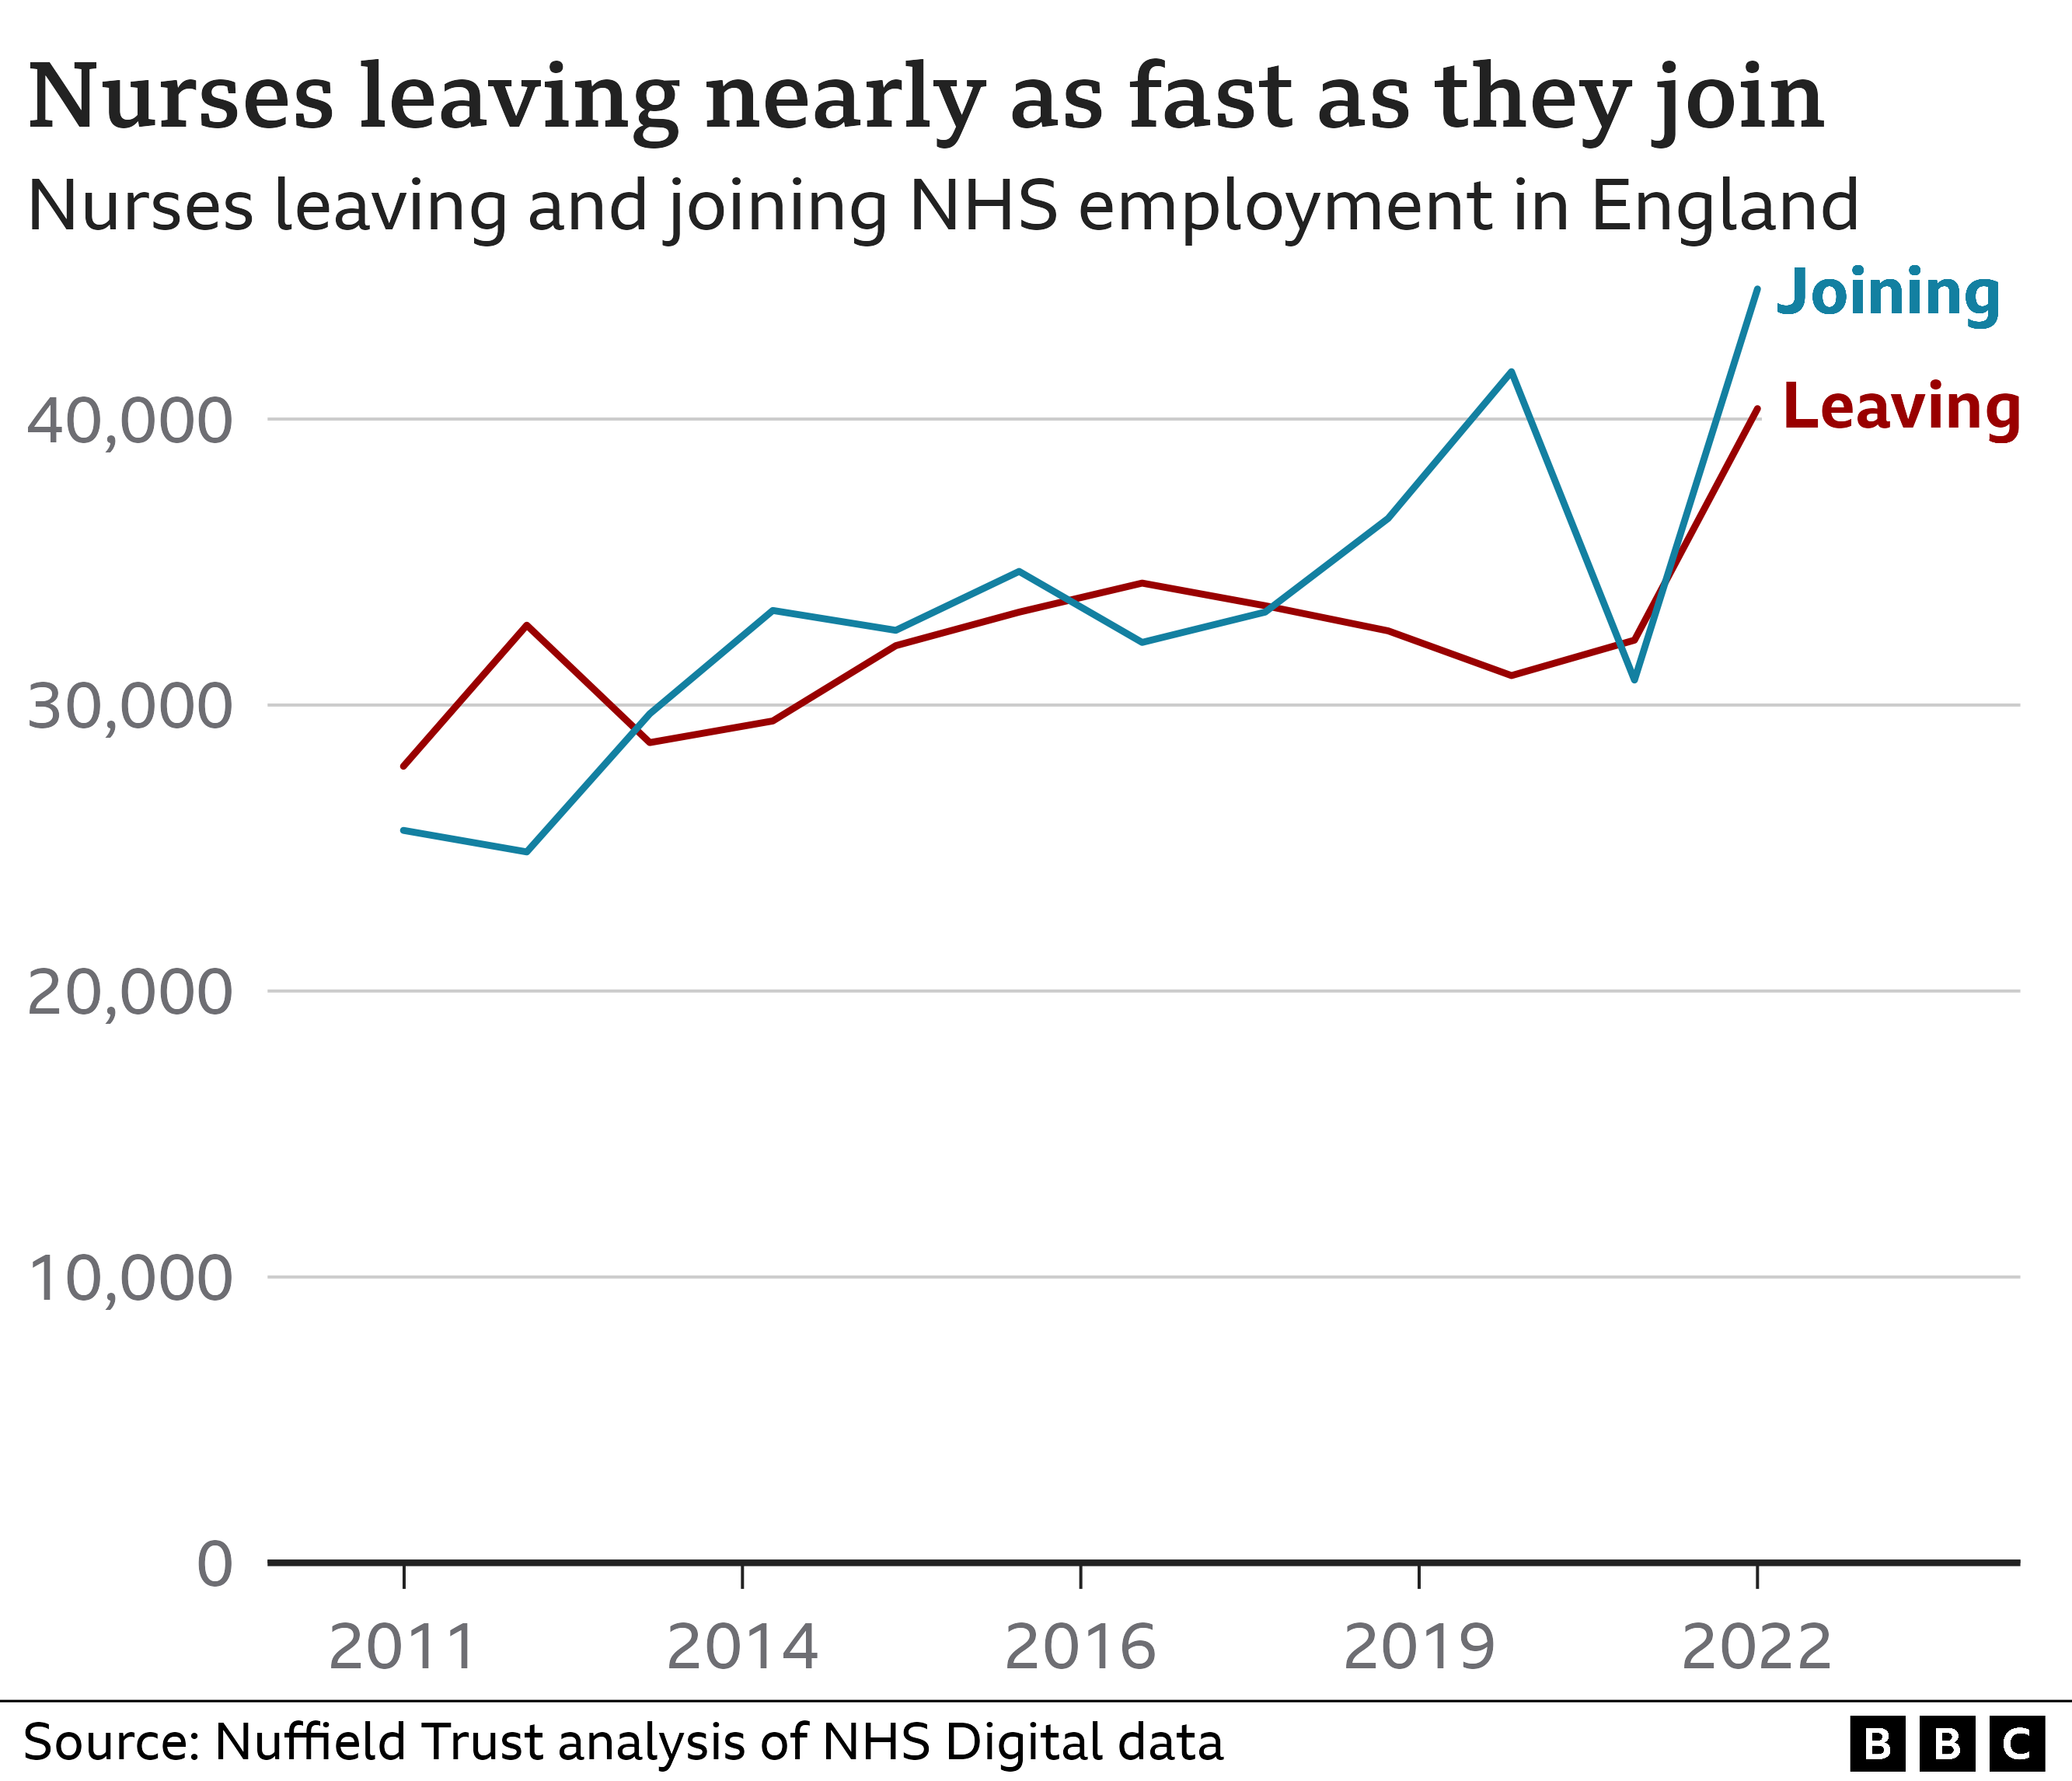 Chart showing nurse leavers and joiners